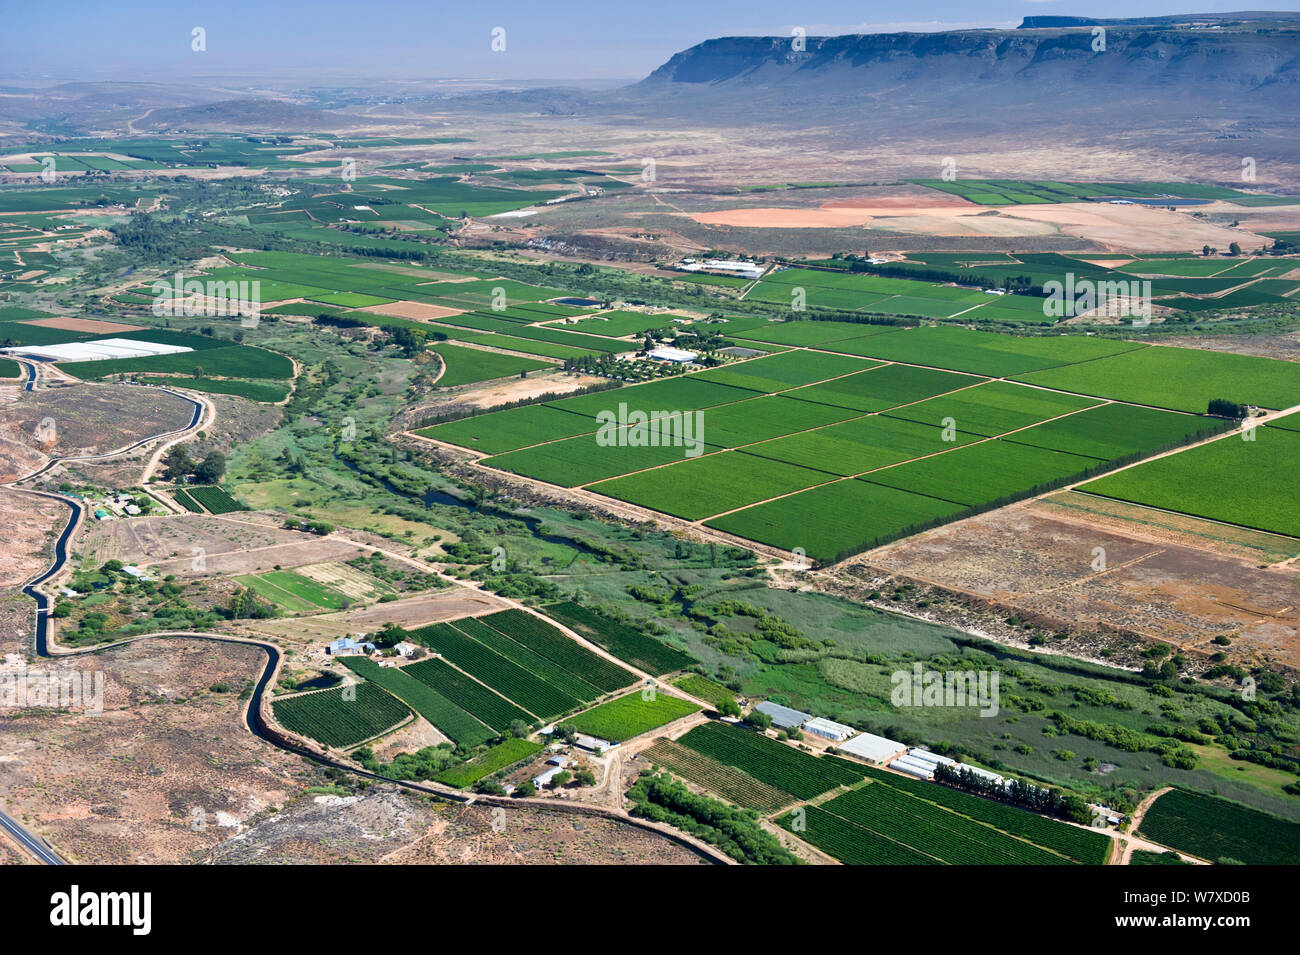 Aerial photograph of the Olifants River and the intensive agriculture along its course, a threat to the endemic fish species found here. Citrusdal and Clanwilliam area, Western Cape, South Africa. December 2013. Stock Photo